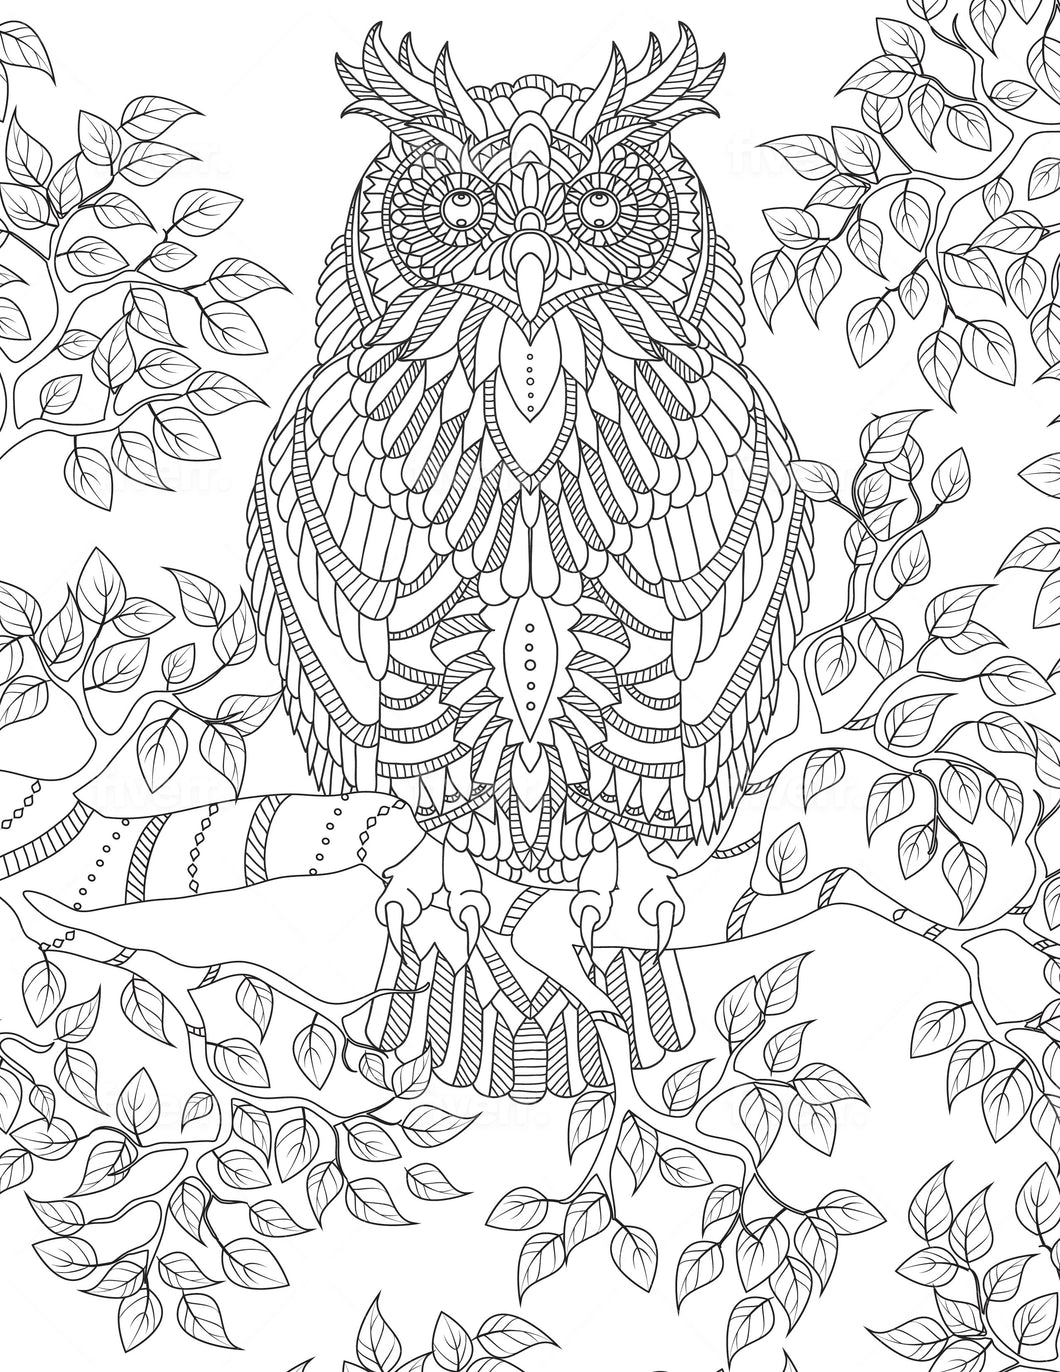 Owl #3 Coloring Sheet - Goin Postal Brentwood